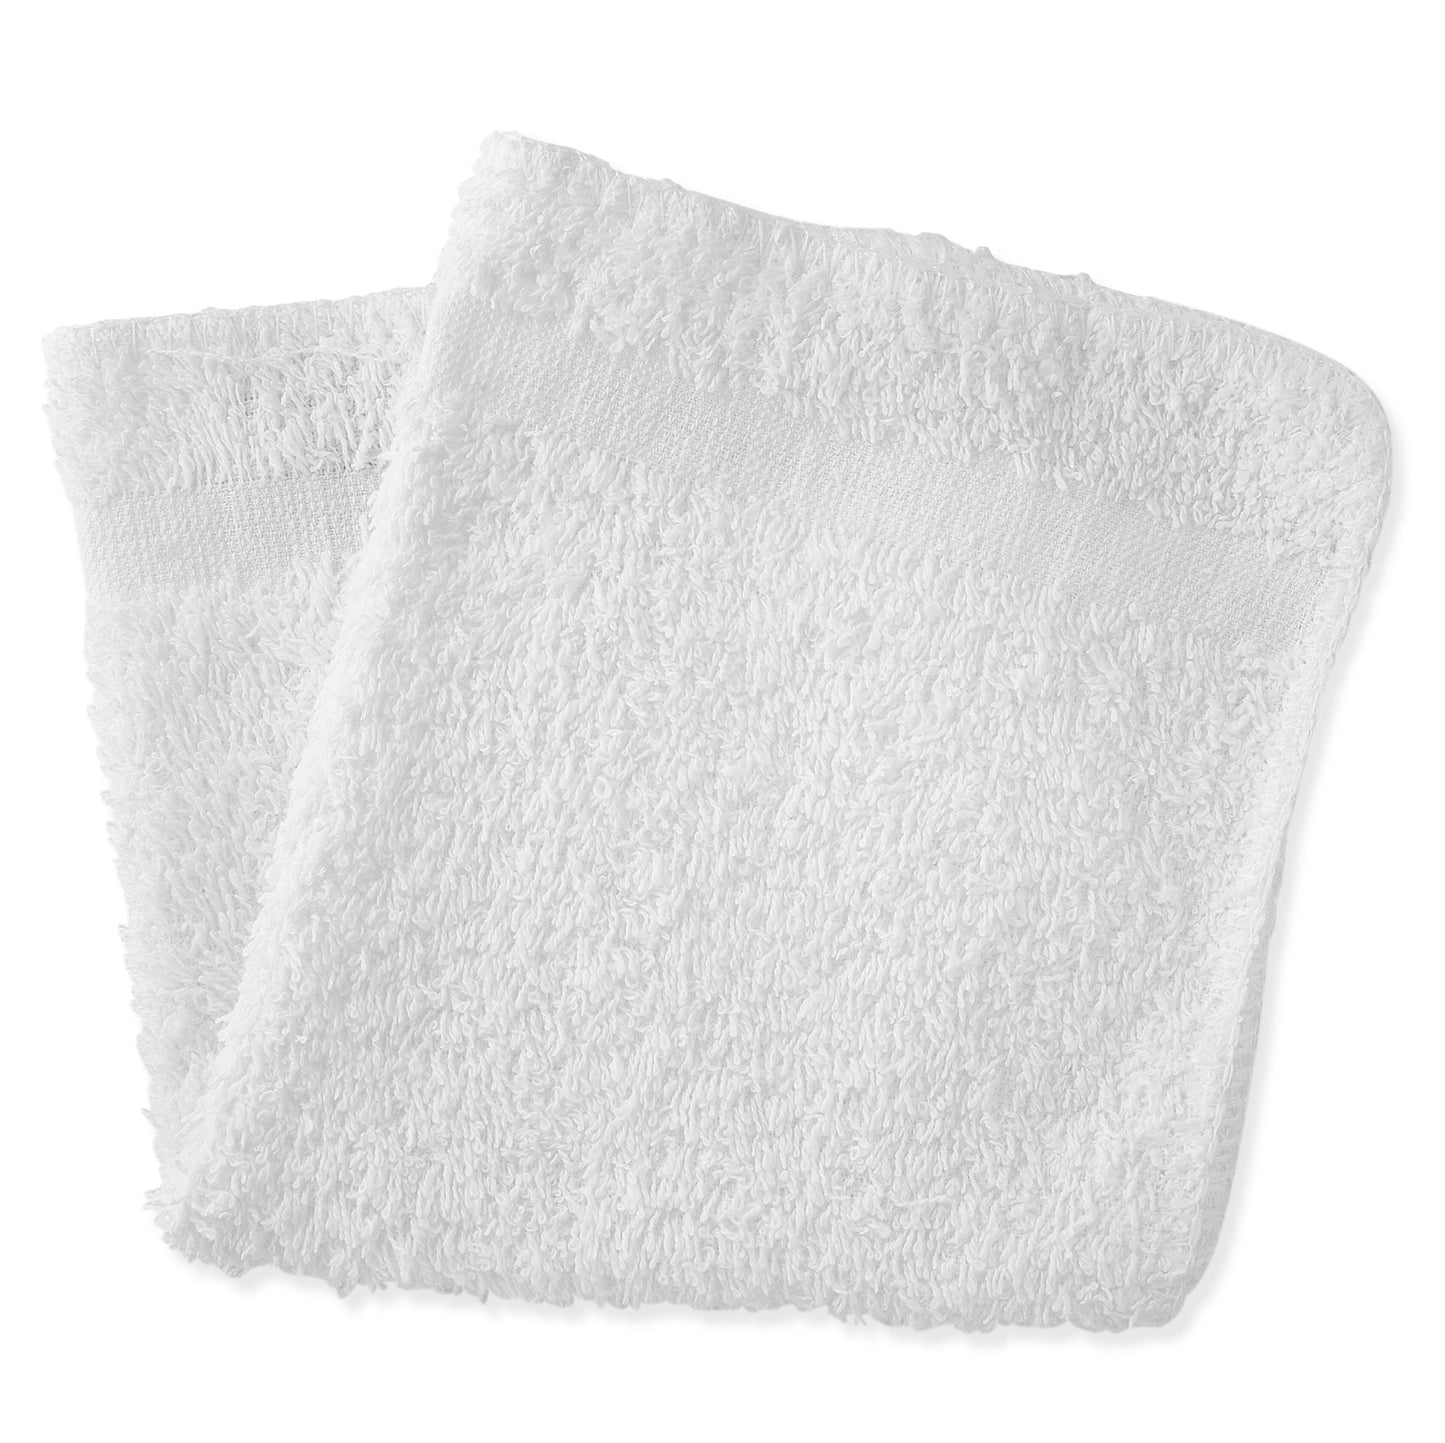 American Dawn | 12X12 Inch White With Single Cam Healthcare Towel | Wash Cloth